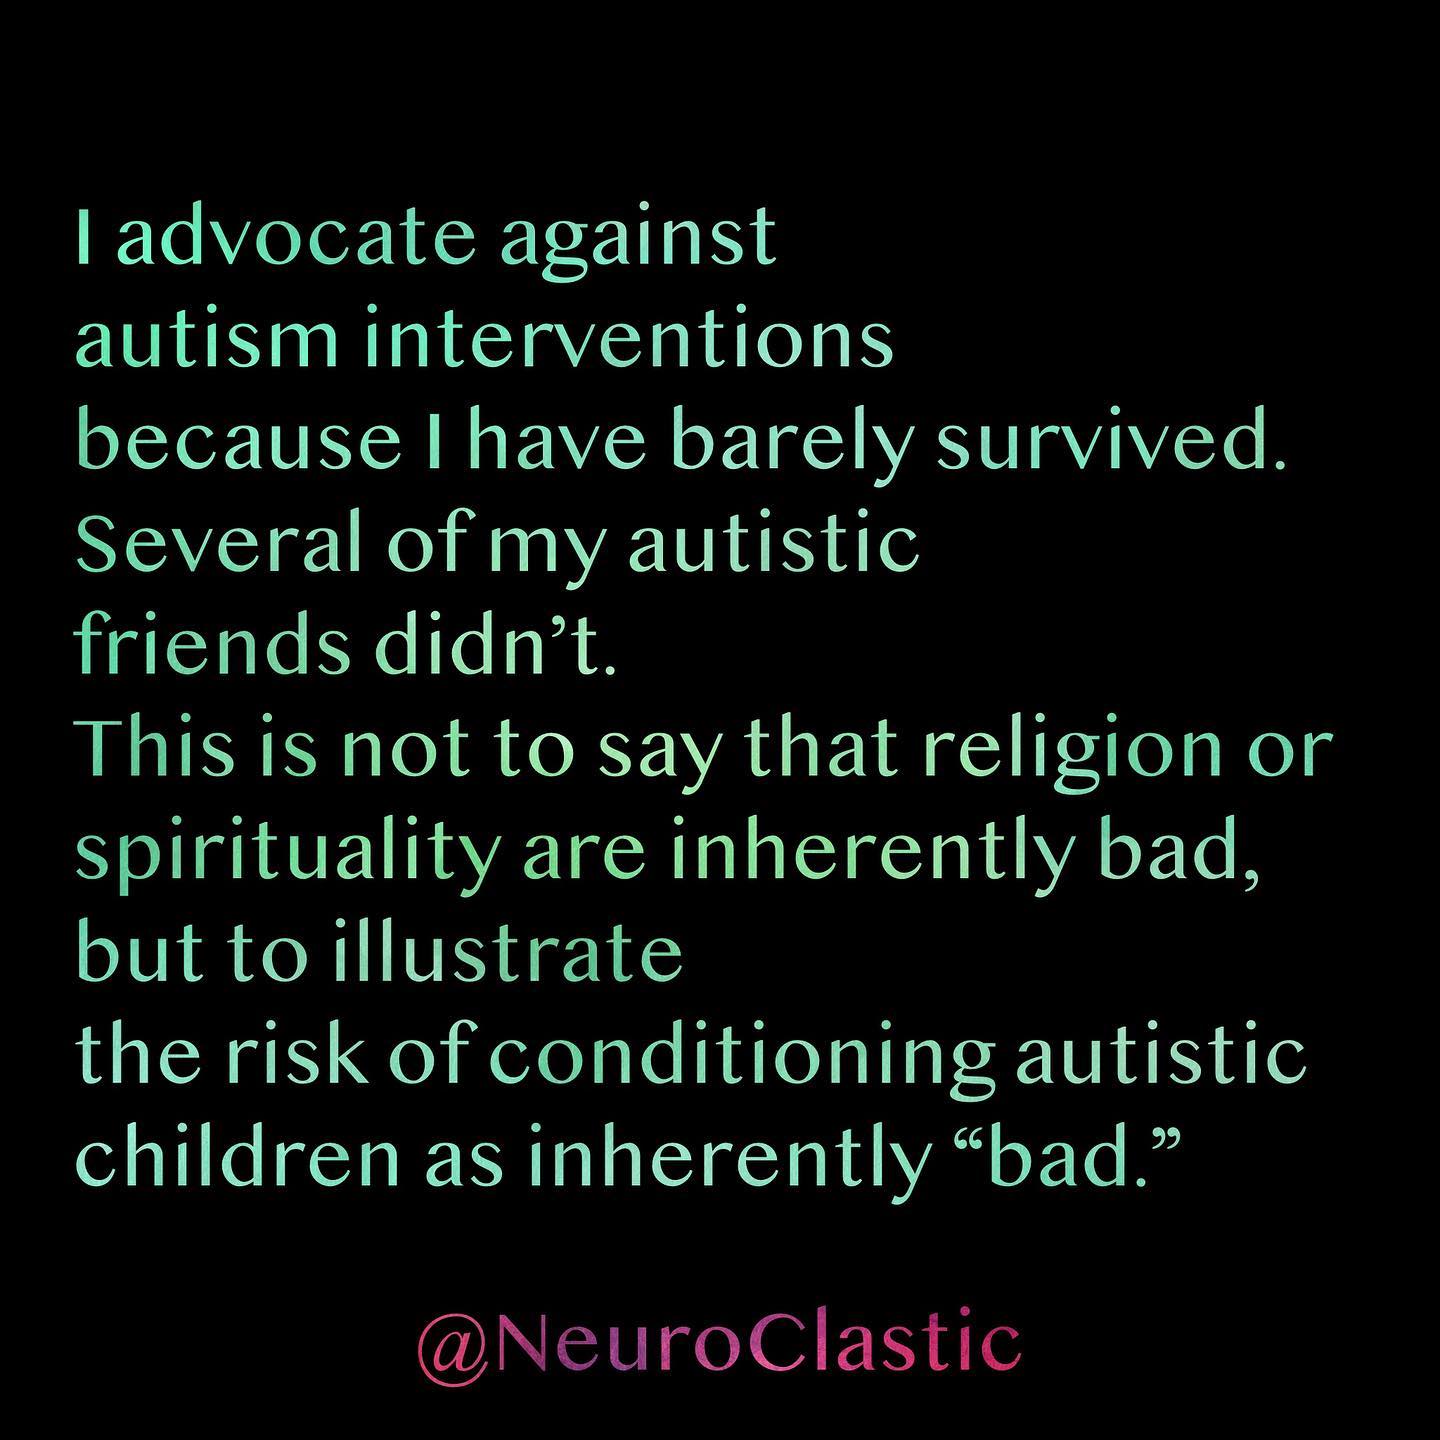 I advocate against autism interventions because I have barely survived. Several of my autistic friends didn’t. This is not to say that religion or spirituality are inherently bad, but to illustrate the risk of conditioning autistic children as inherently “bad.” @NeuroClastic